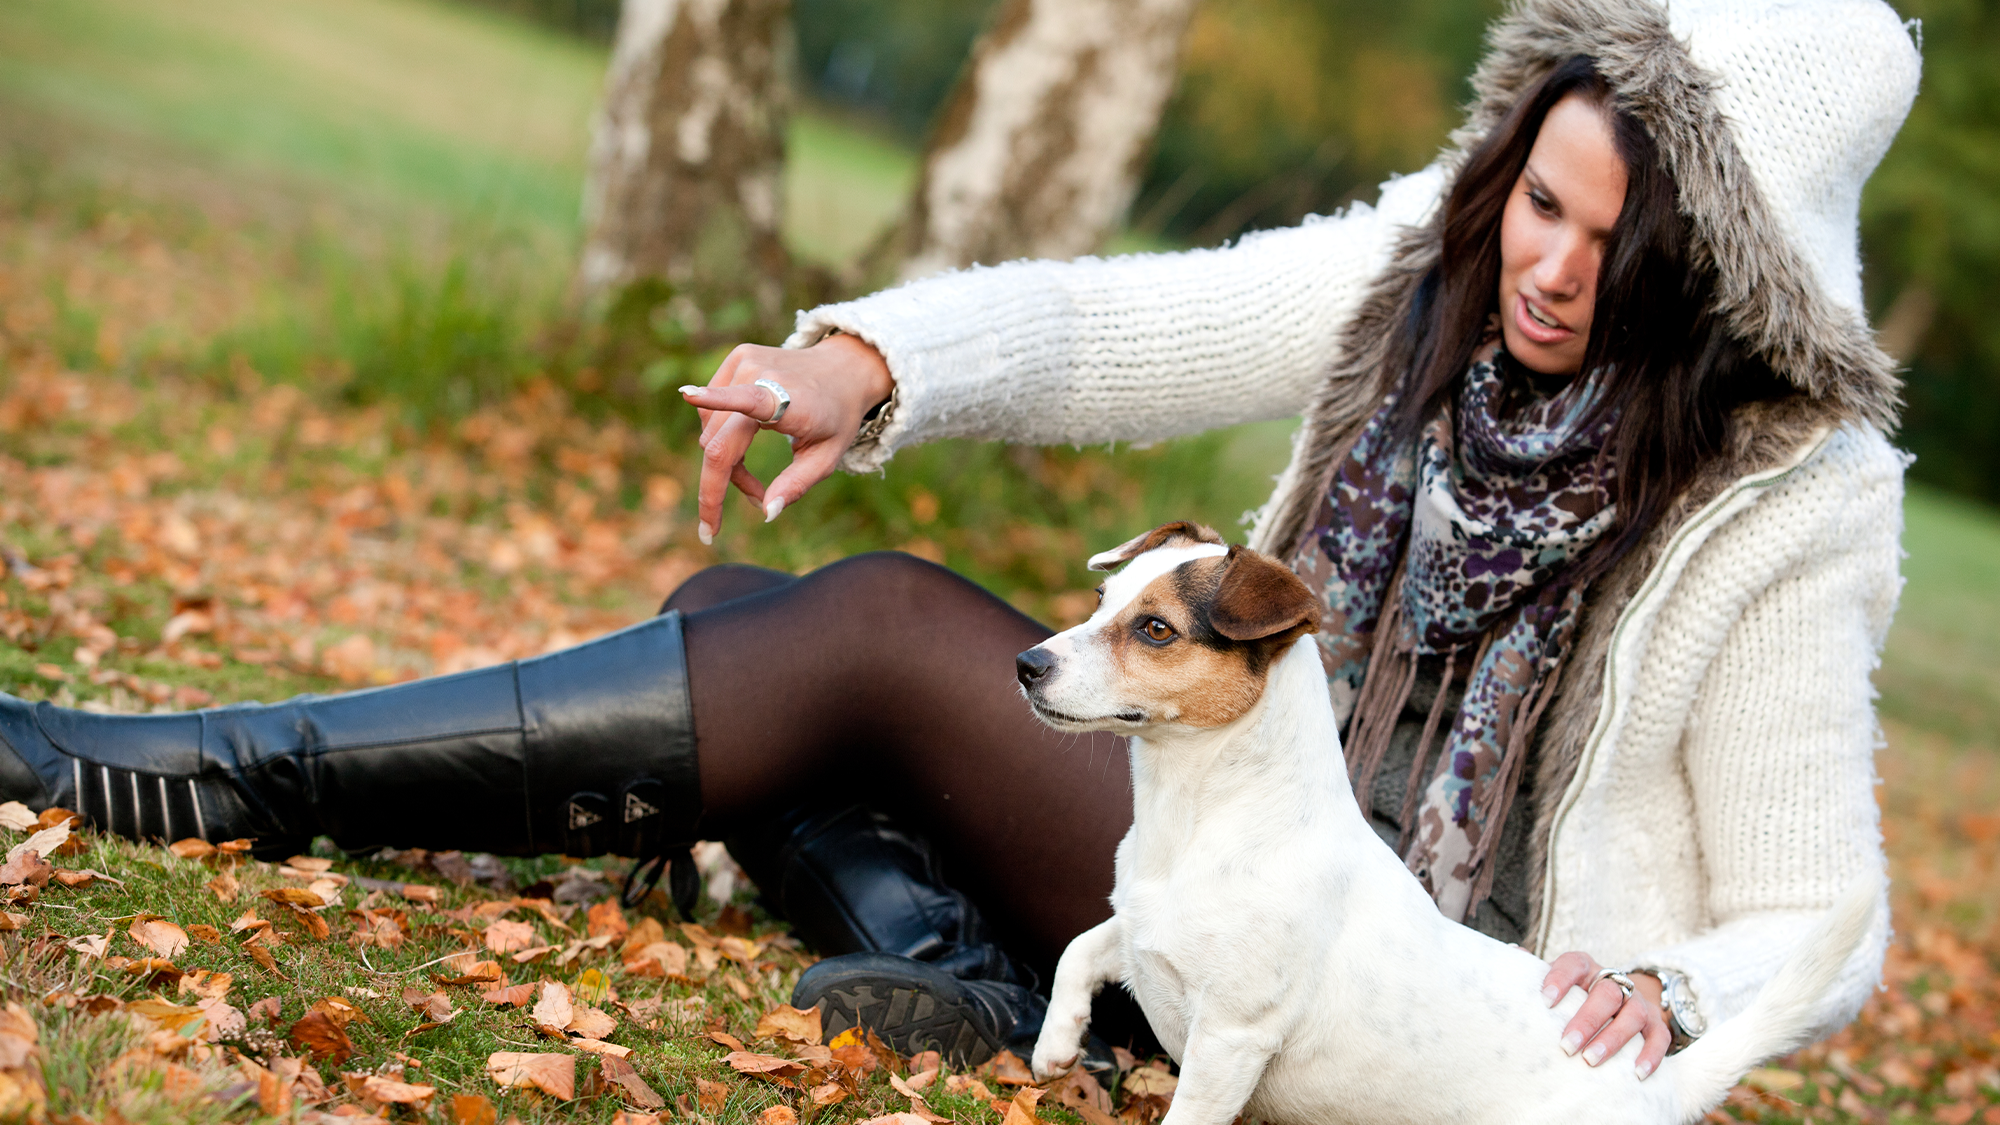 A woman in a puffy coat points in a direction. Her small dog looks excitedly in that direction. They are sitting in a park with oranges leaves on green grass.